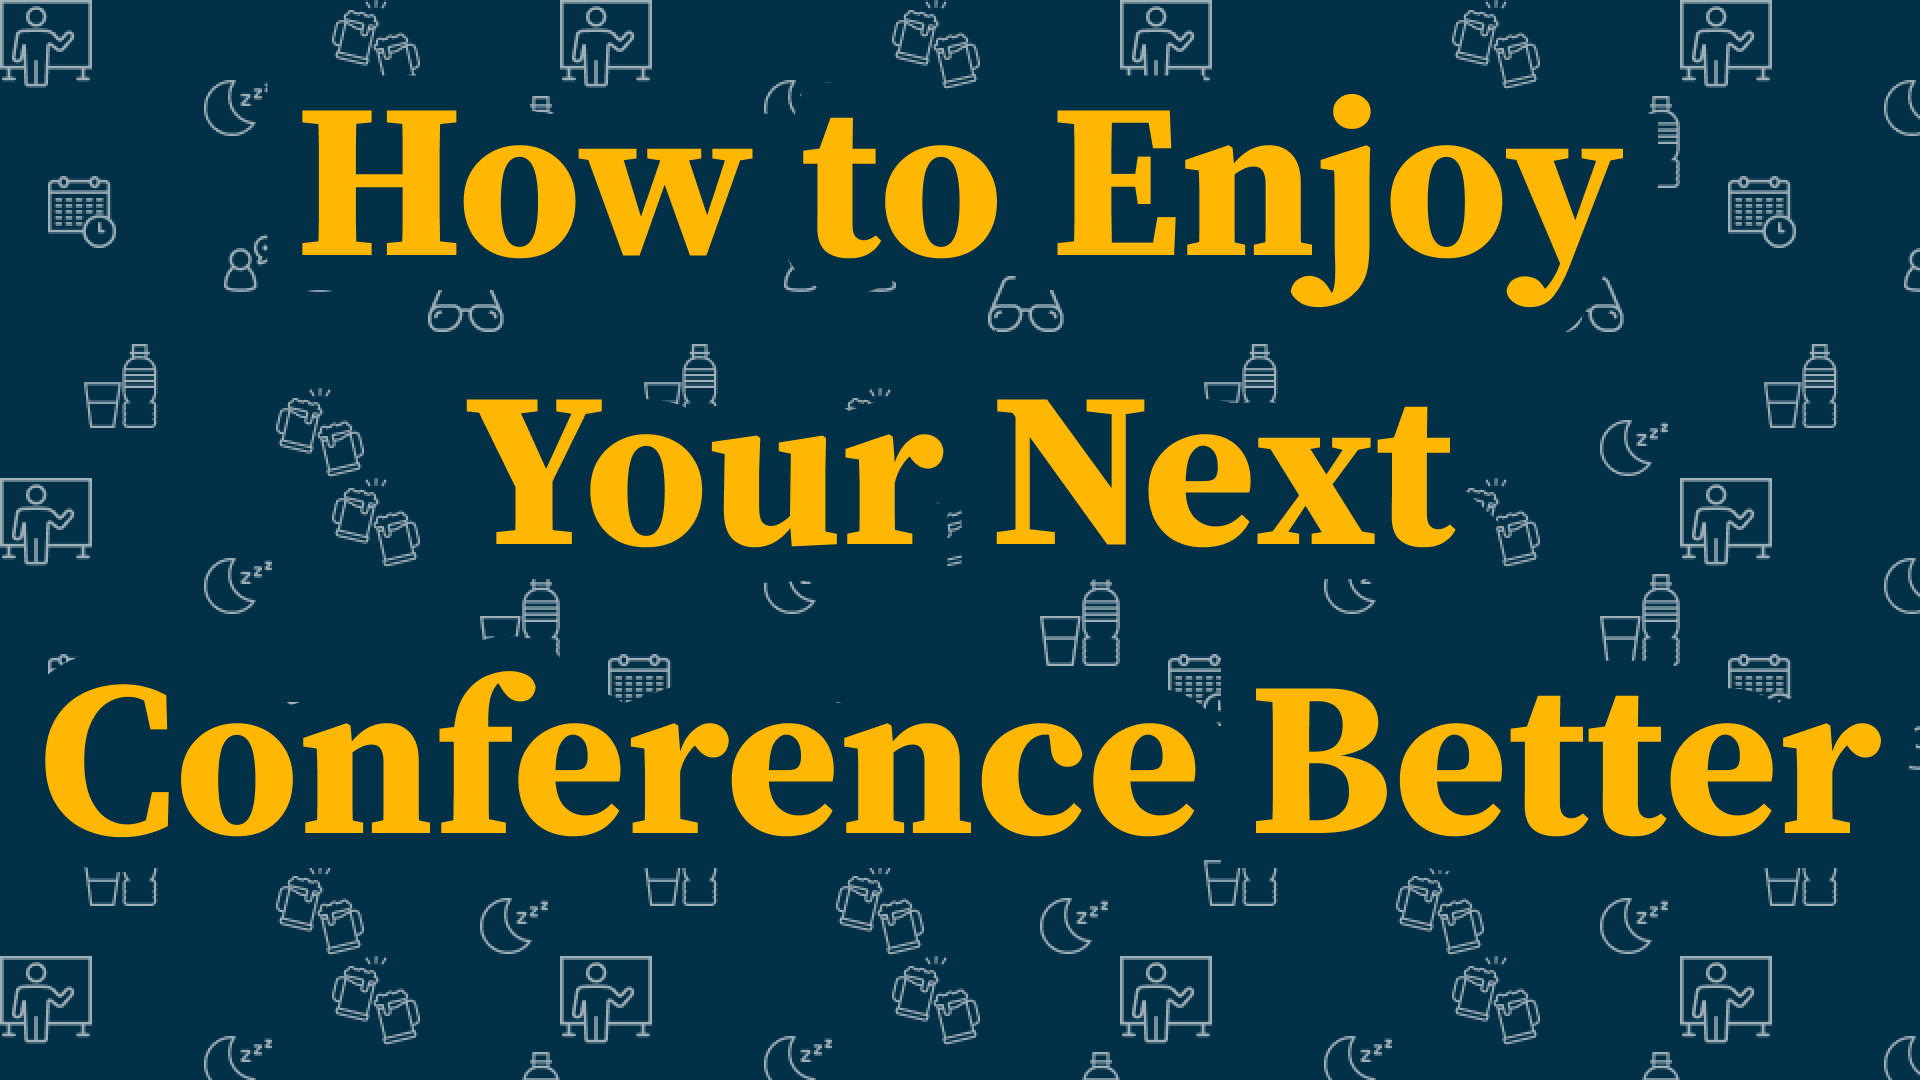 How to Enjoy Your Next Conference Better